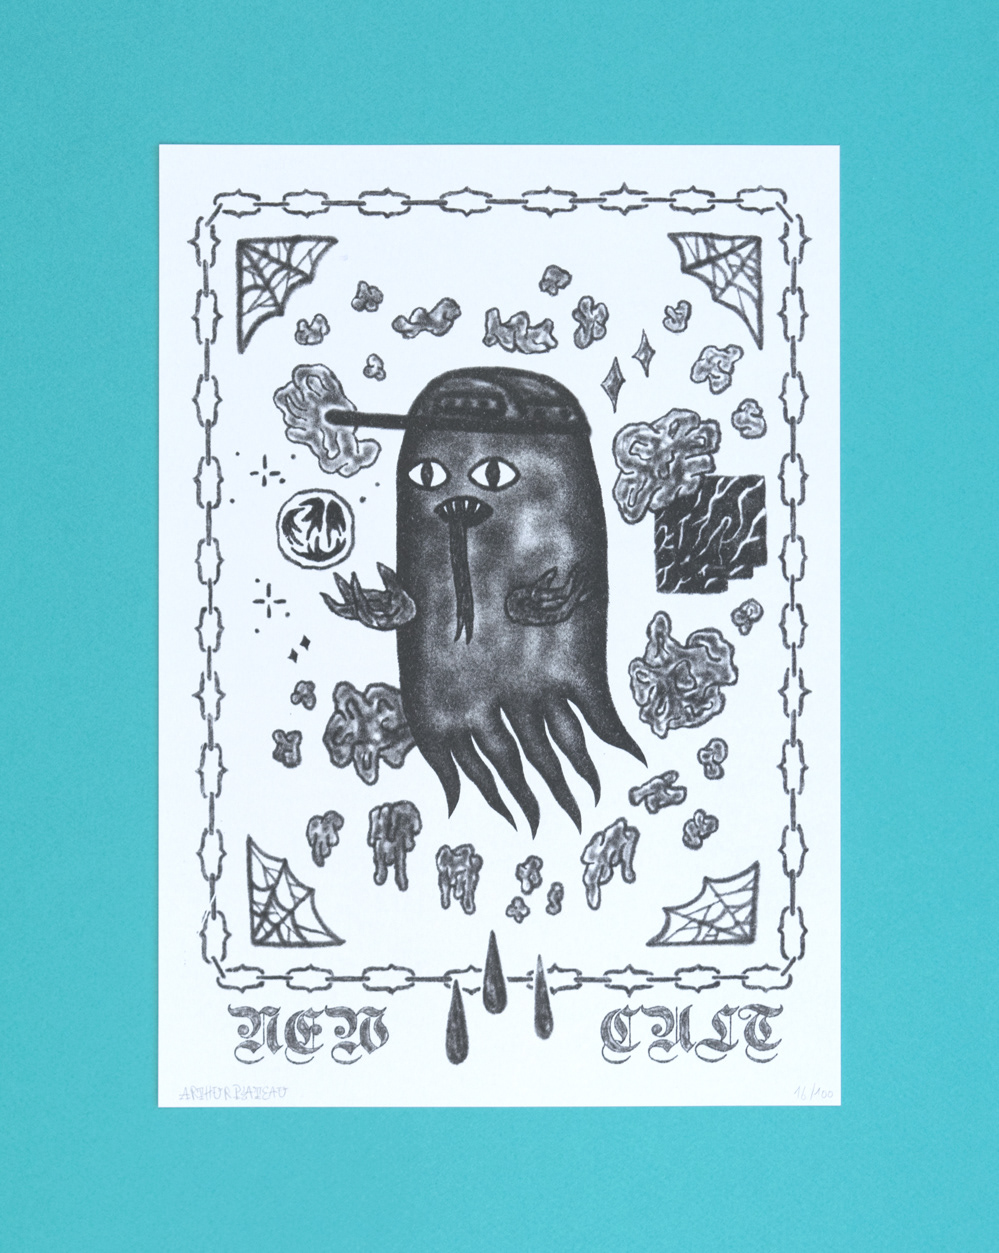 wicked disciple Riso risograph Risographie risography print ink printmaking Munken ILLUSTRATION 